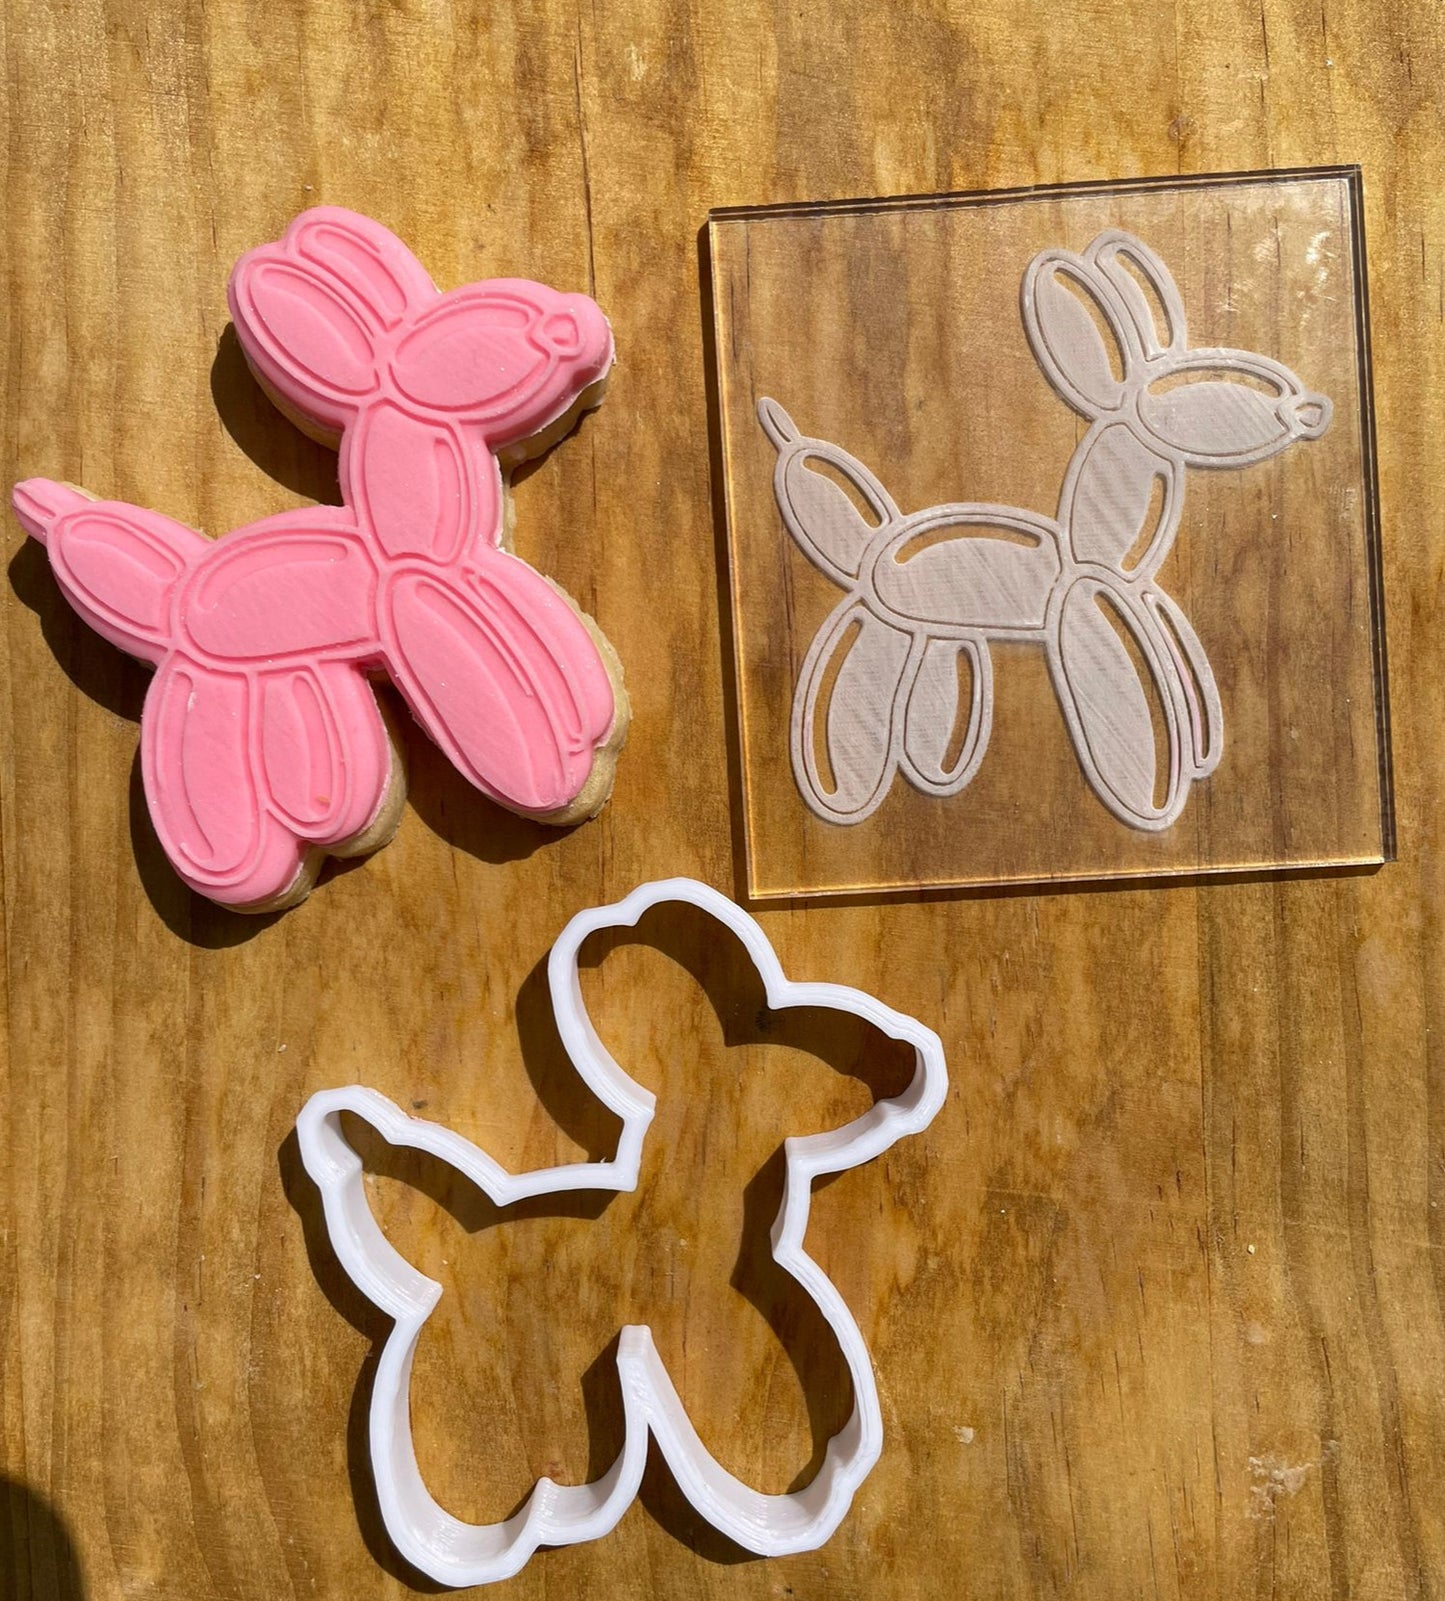 Dog Balloon- debossing and matching cutter MEG cookie cutters